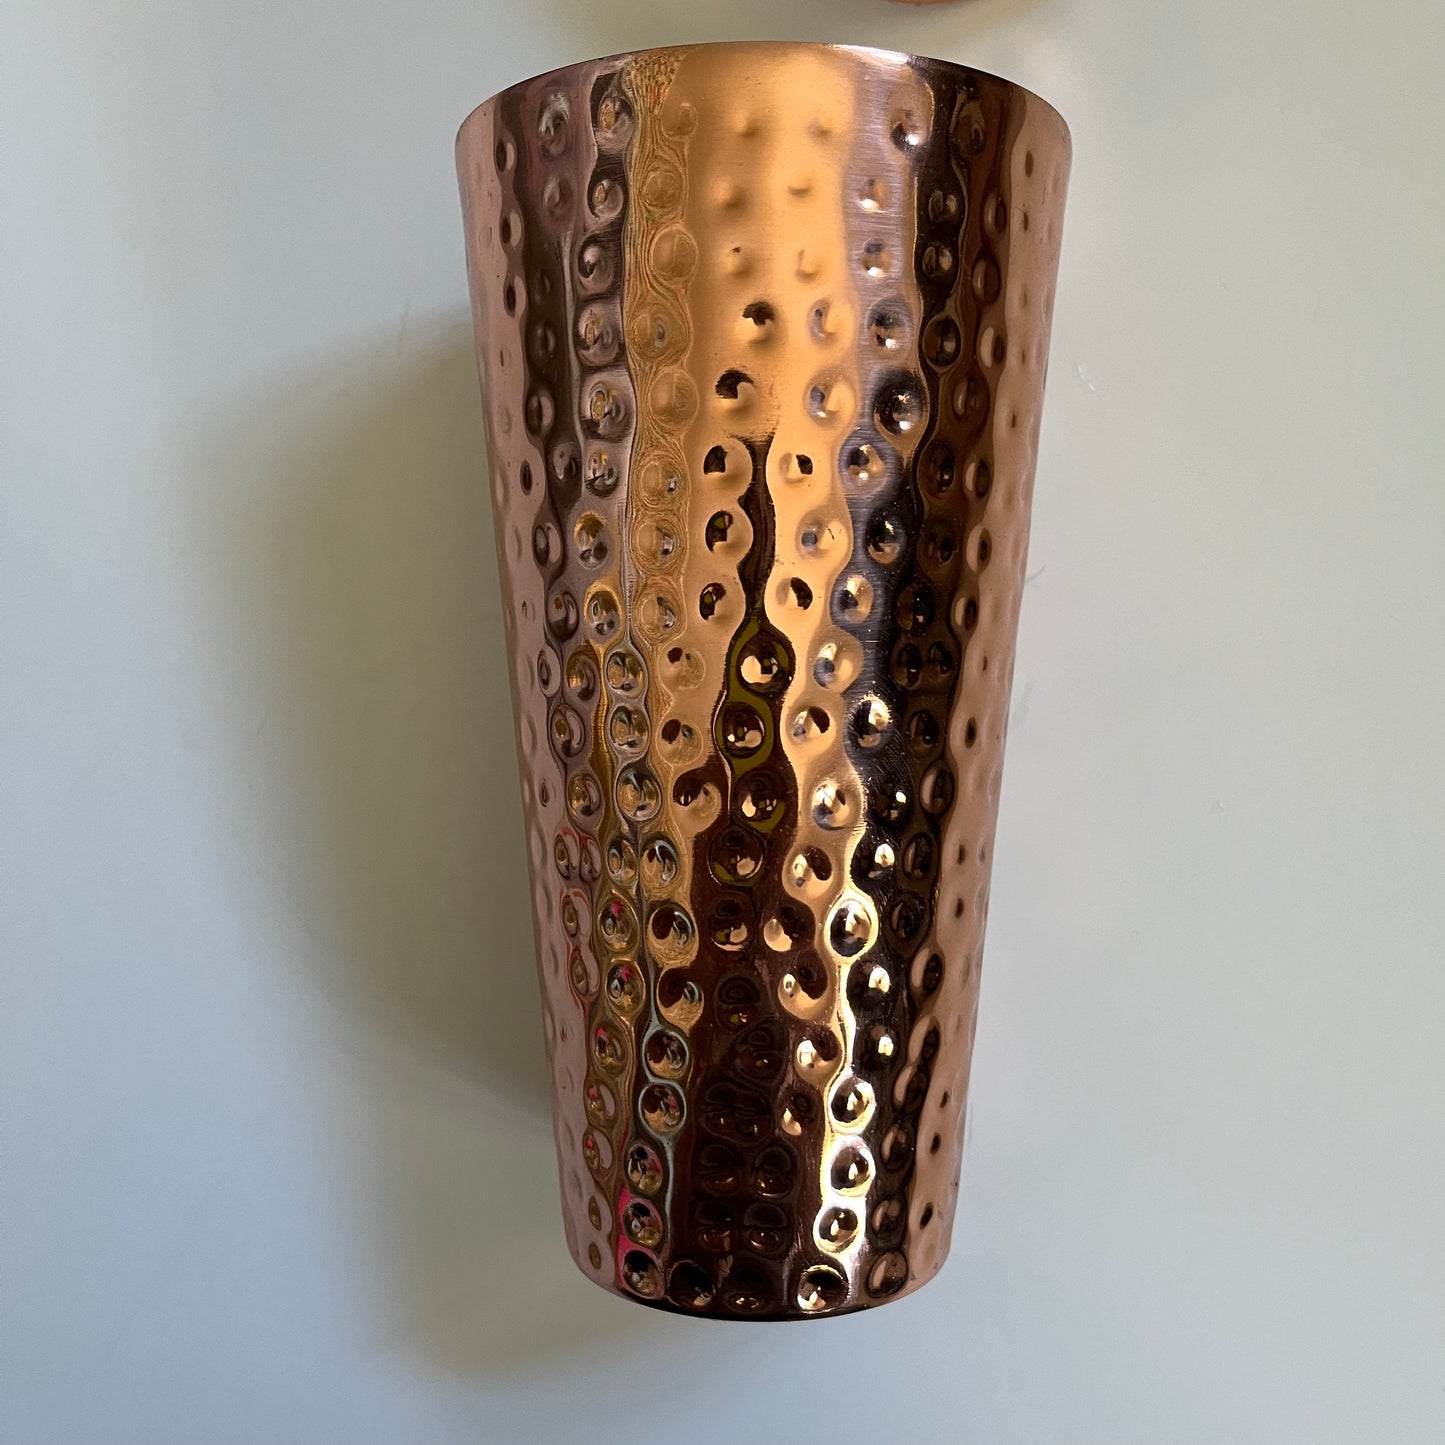 Stainless Steel Hammered Textured Copper Tumbler Cups 16 ounce Set of 4